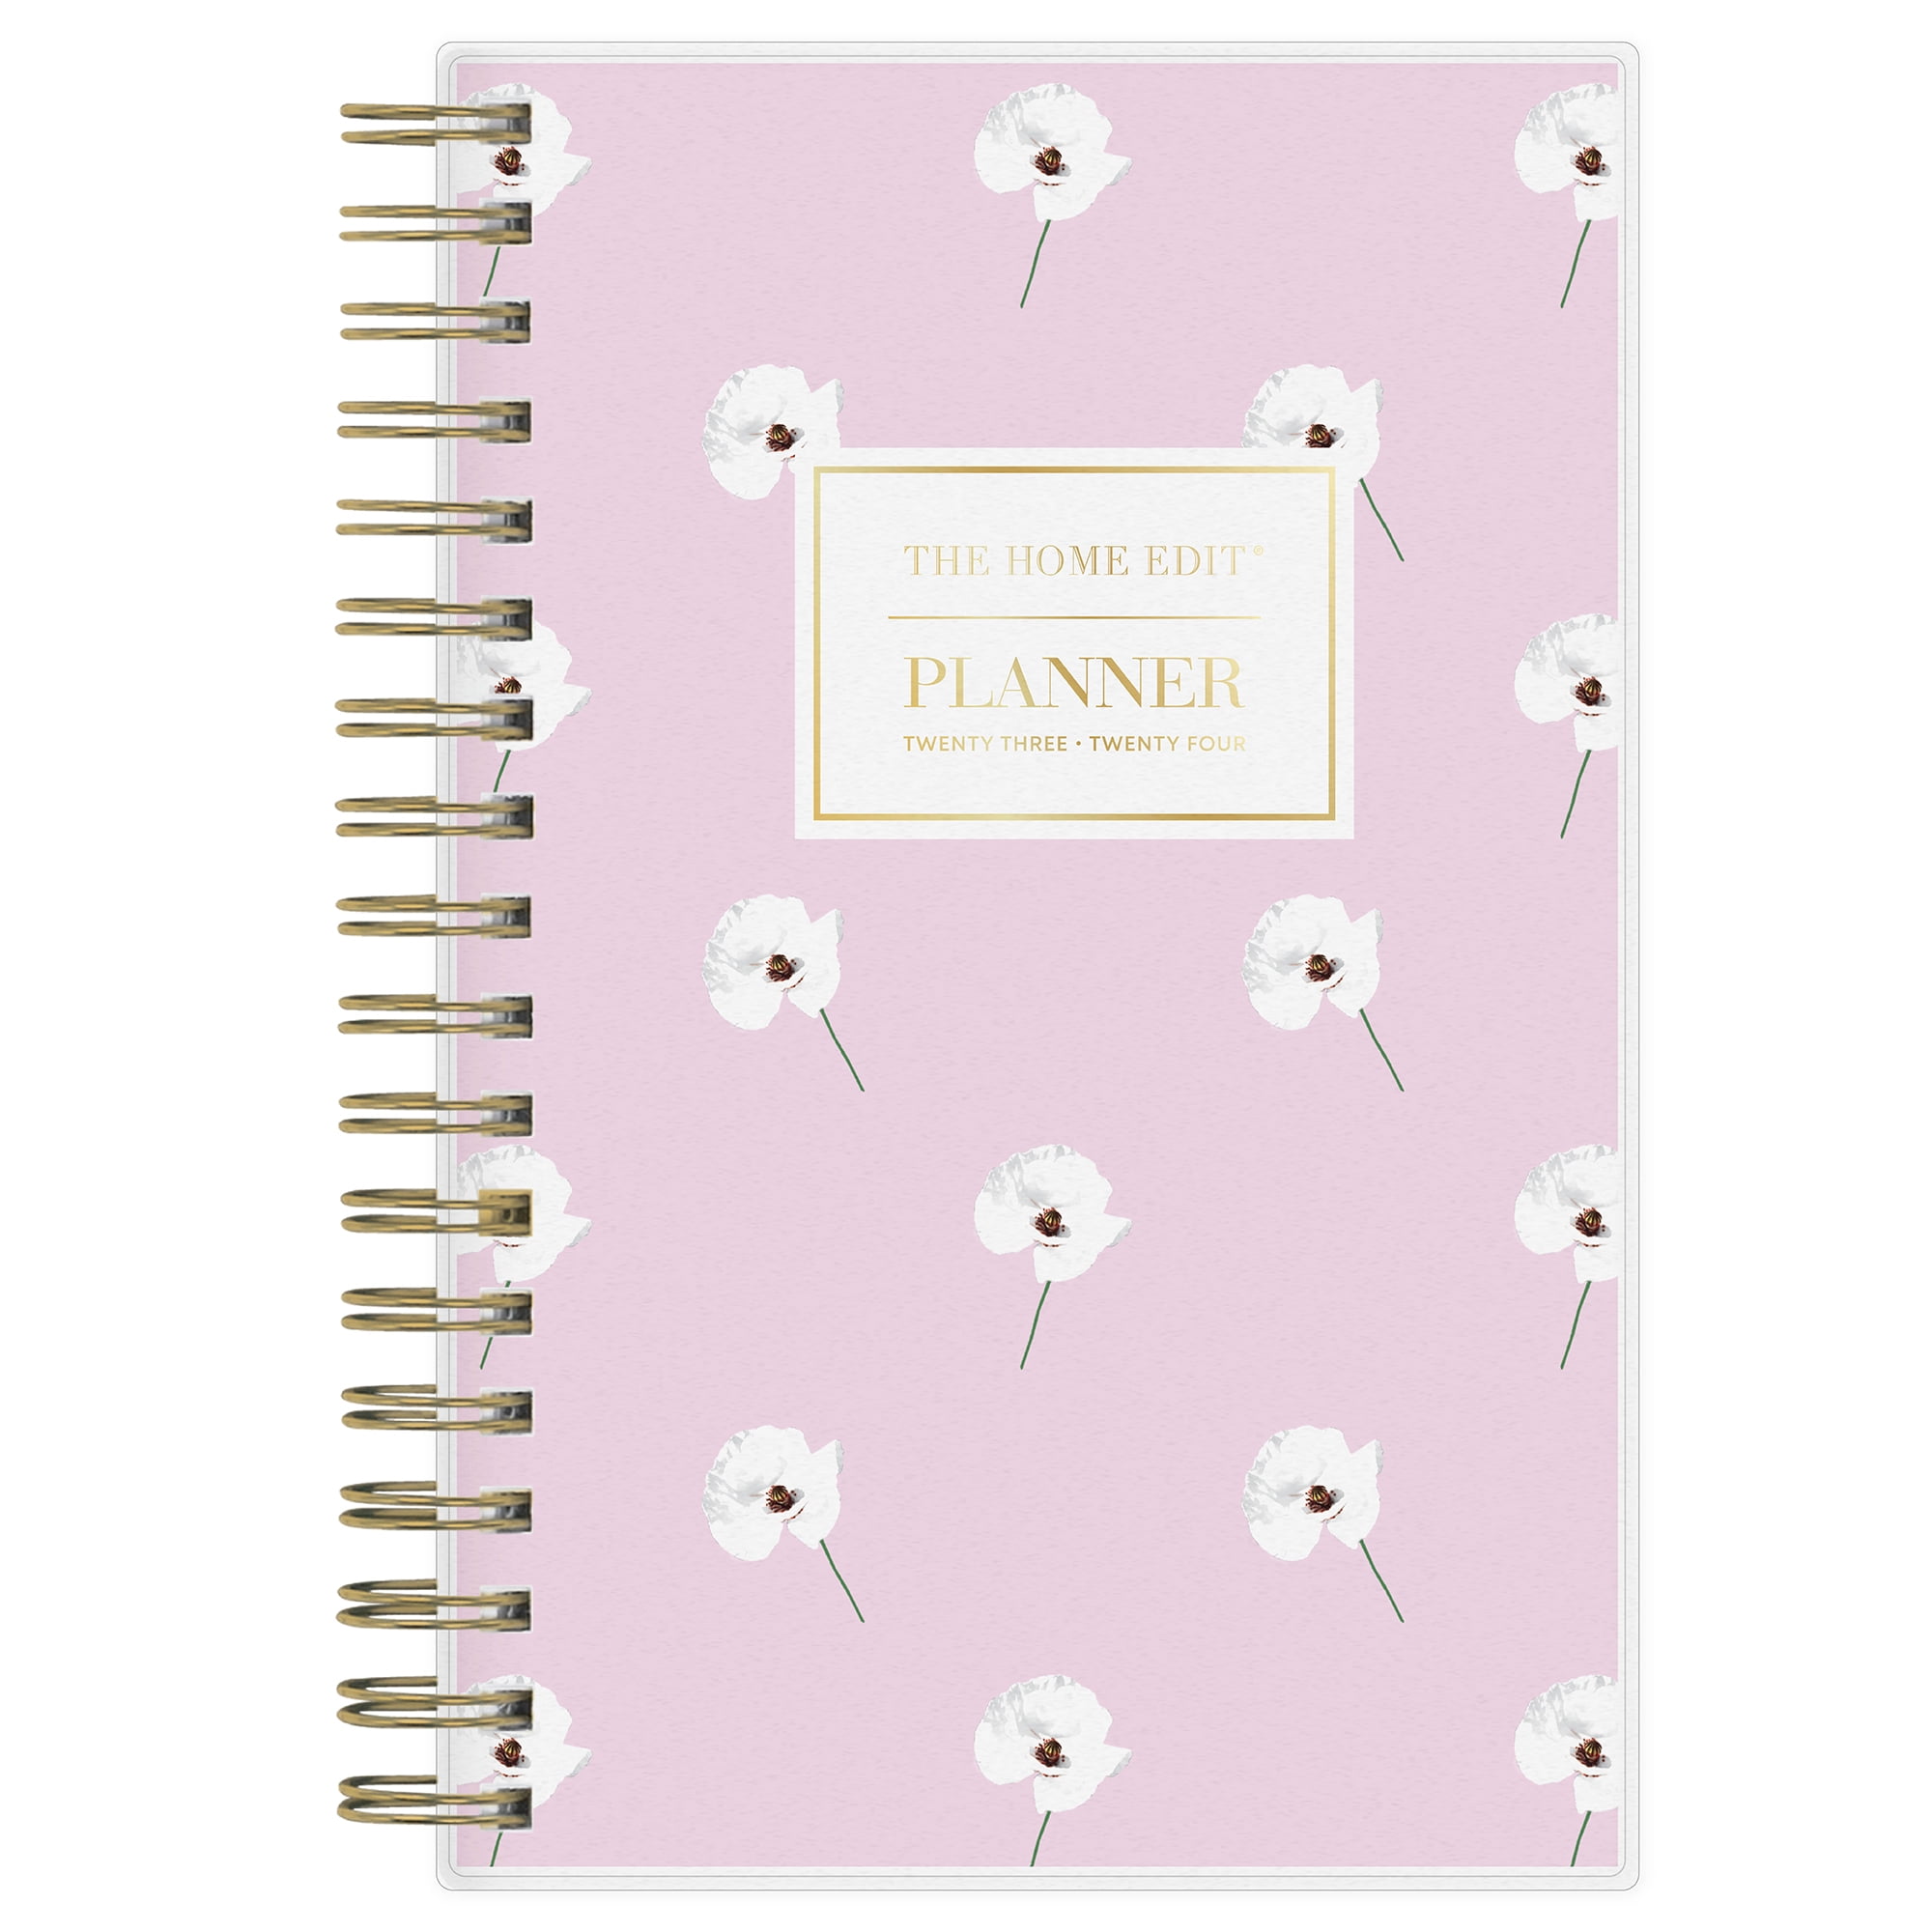 2023- 2024 Hello Kitty 6-Rings Personal Organizer Compact Planner Schedule  Book Agenda PURPLE Inspired by You.